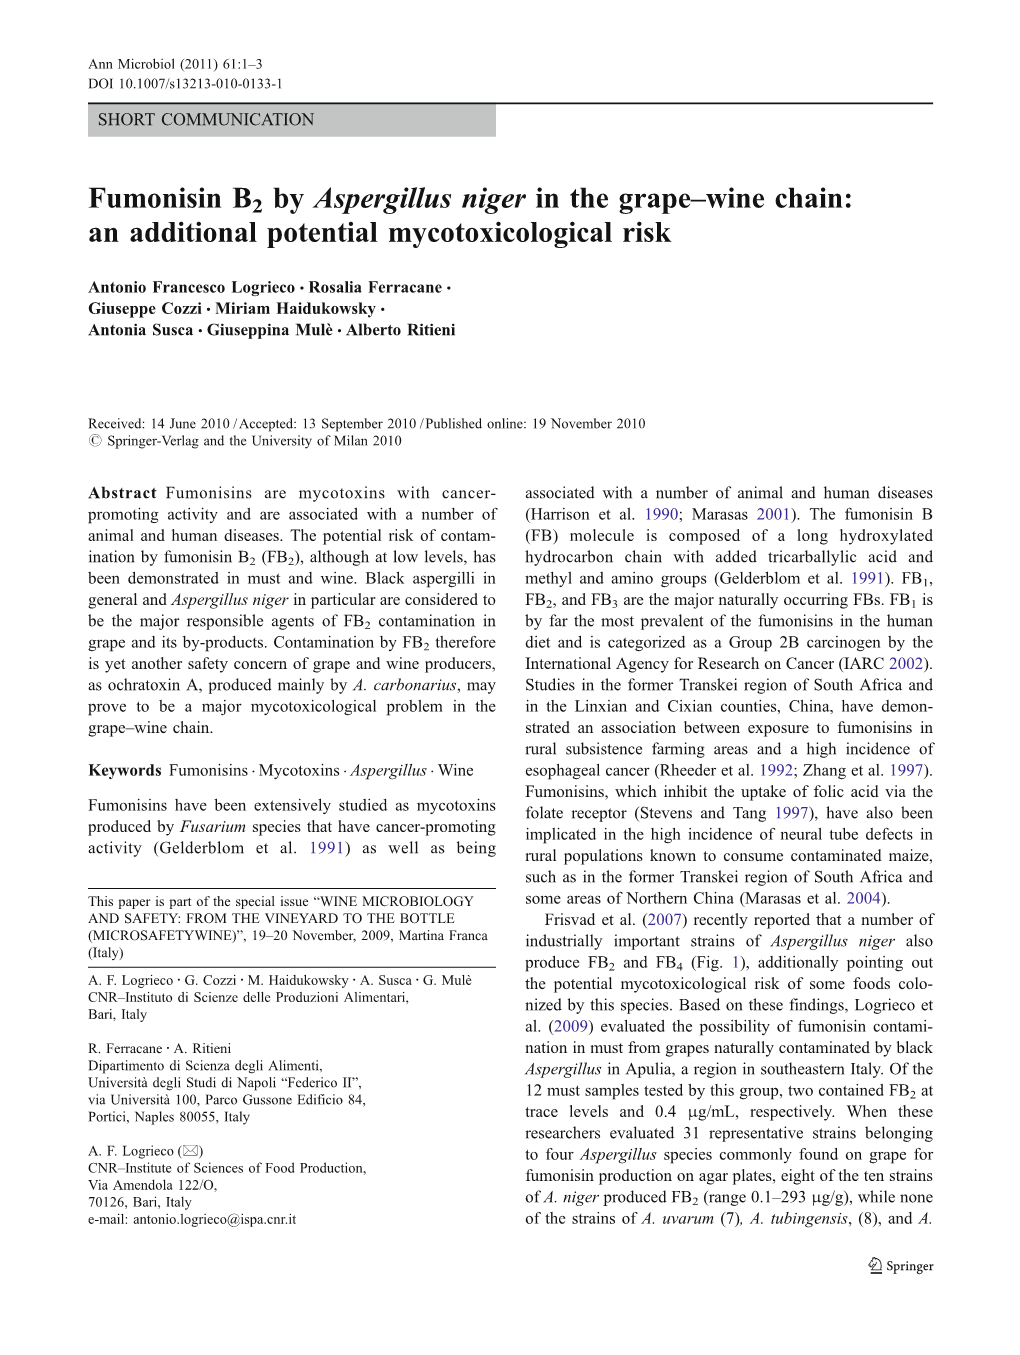 Fumonisin B2 by Aspergillus Niger in the Grape–Wine Chain: an Additional Potential Mycotoxicological Risk